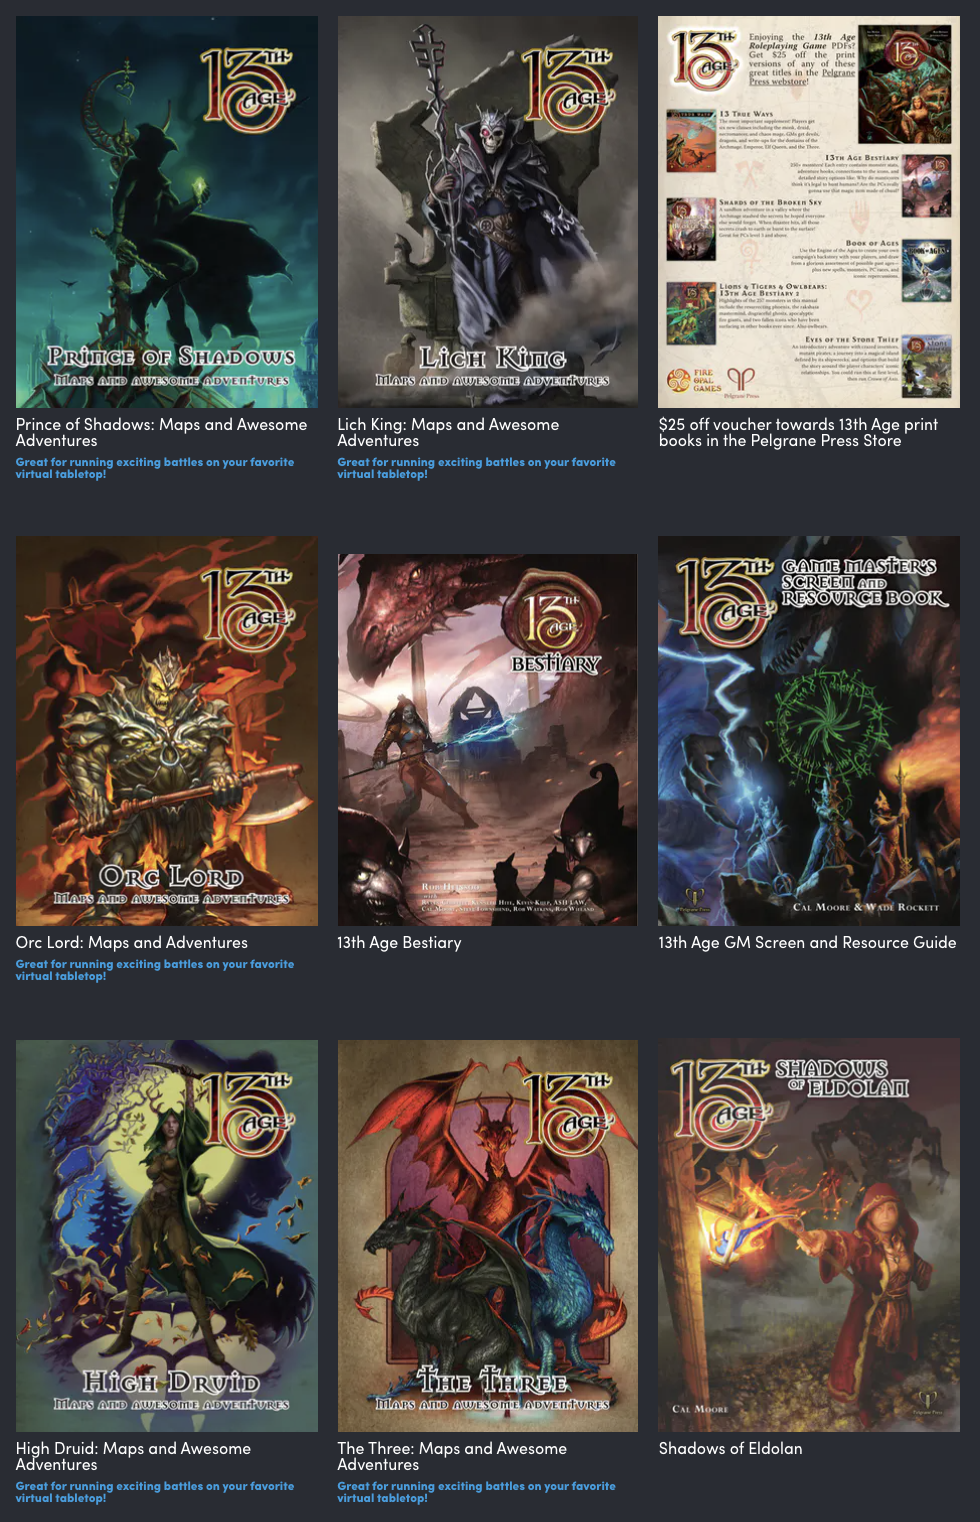 Score an Incredible Deal on Pathfinder RPG PDFs Through Humble Bundle - The  Gaming Gang